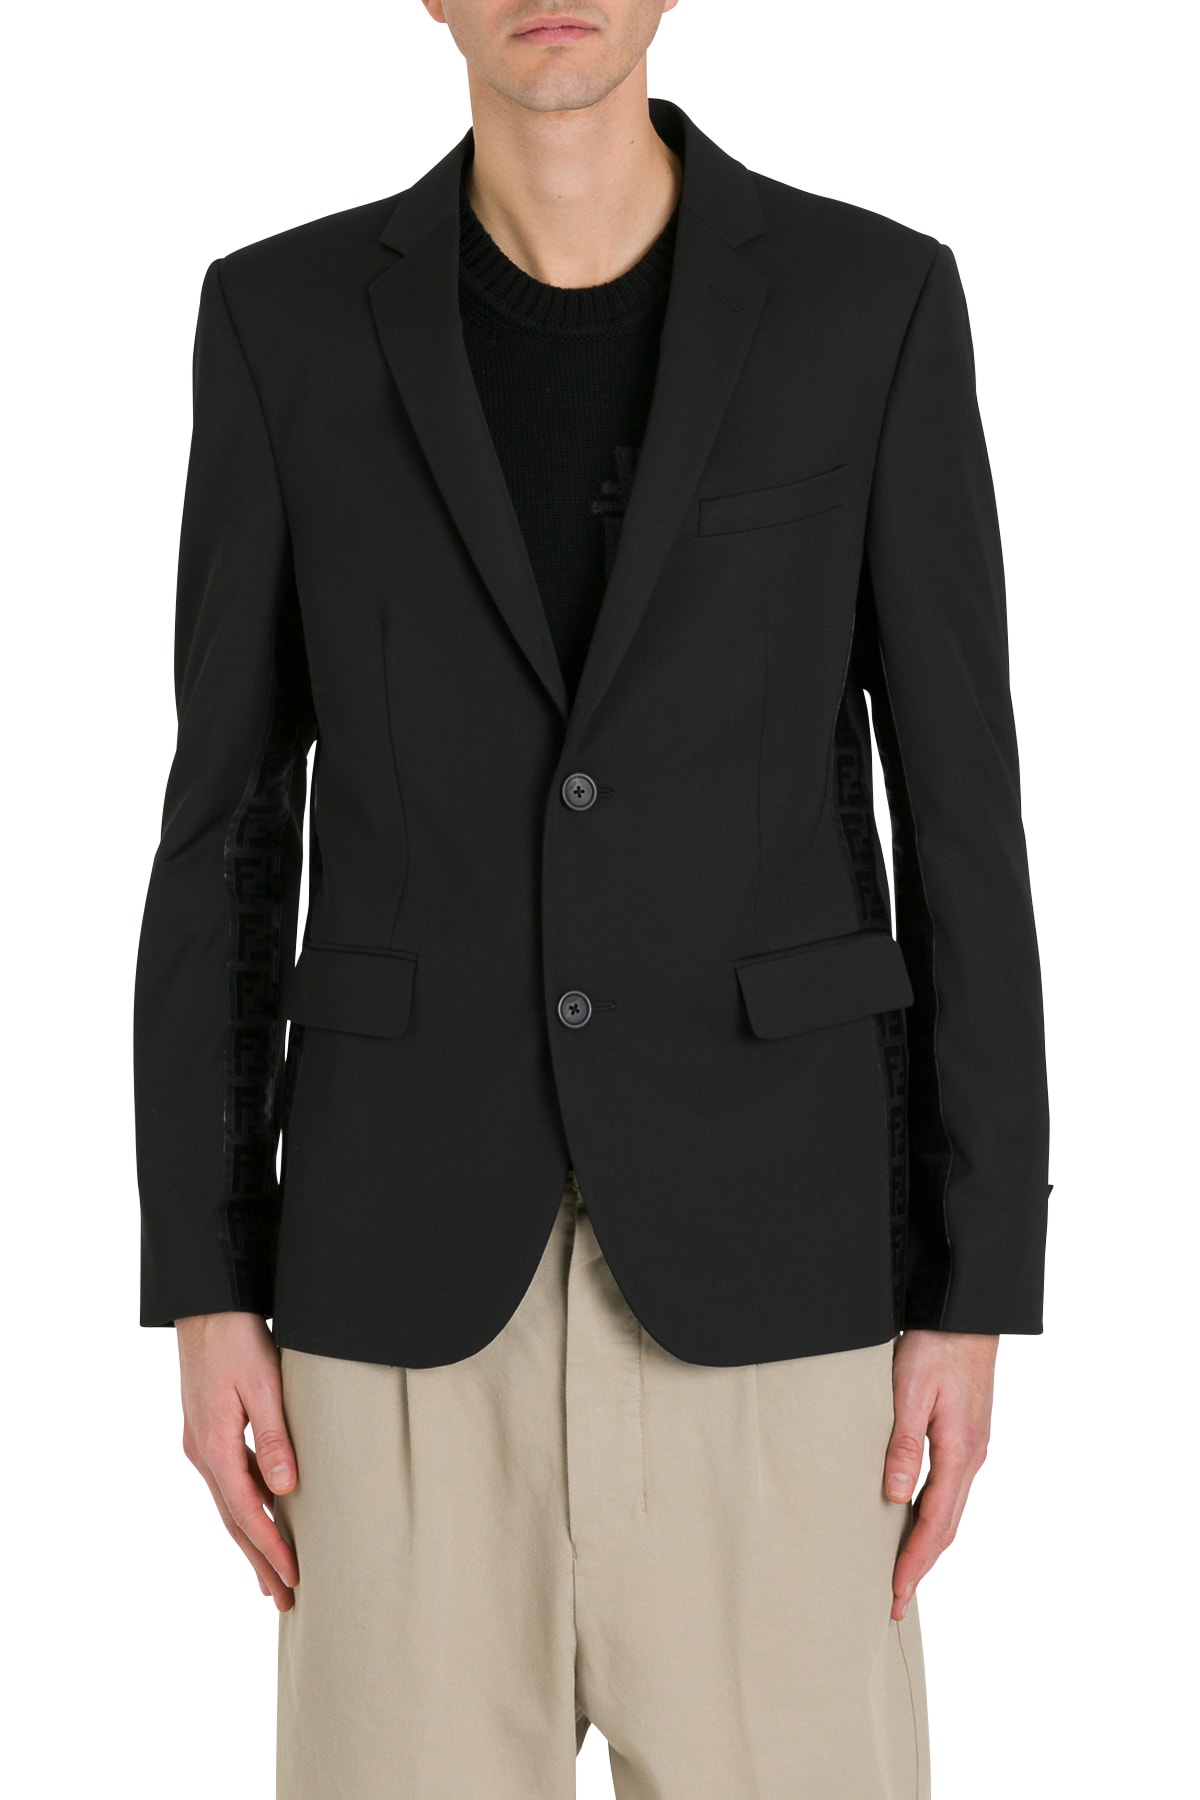 Fendi Tailoring Blazer With Ff Bands